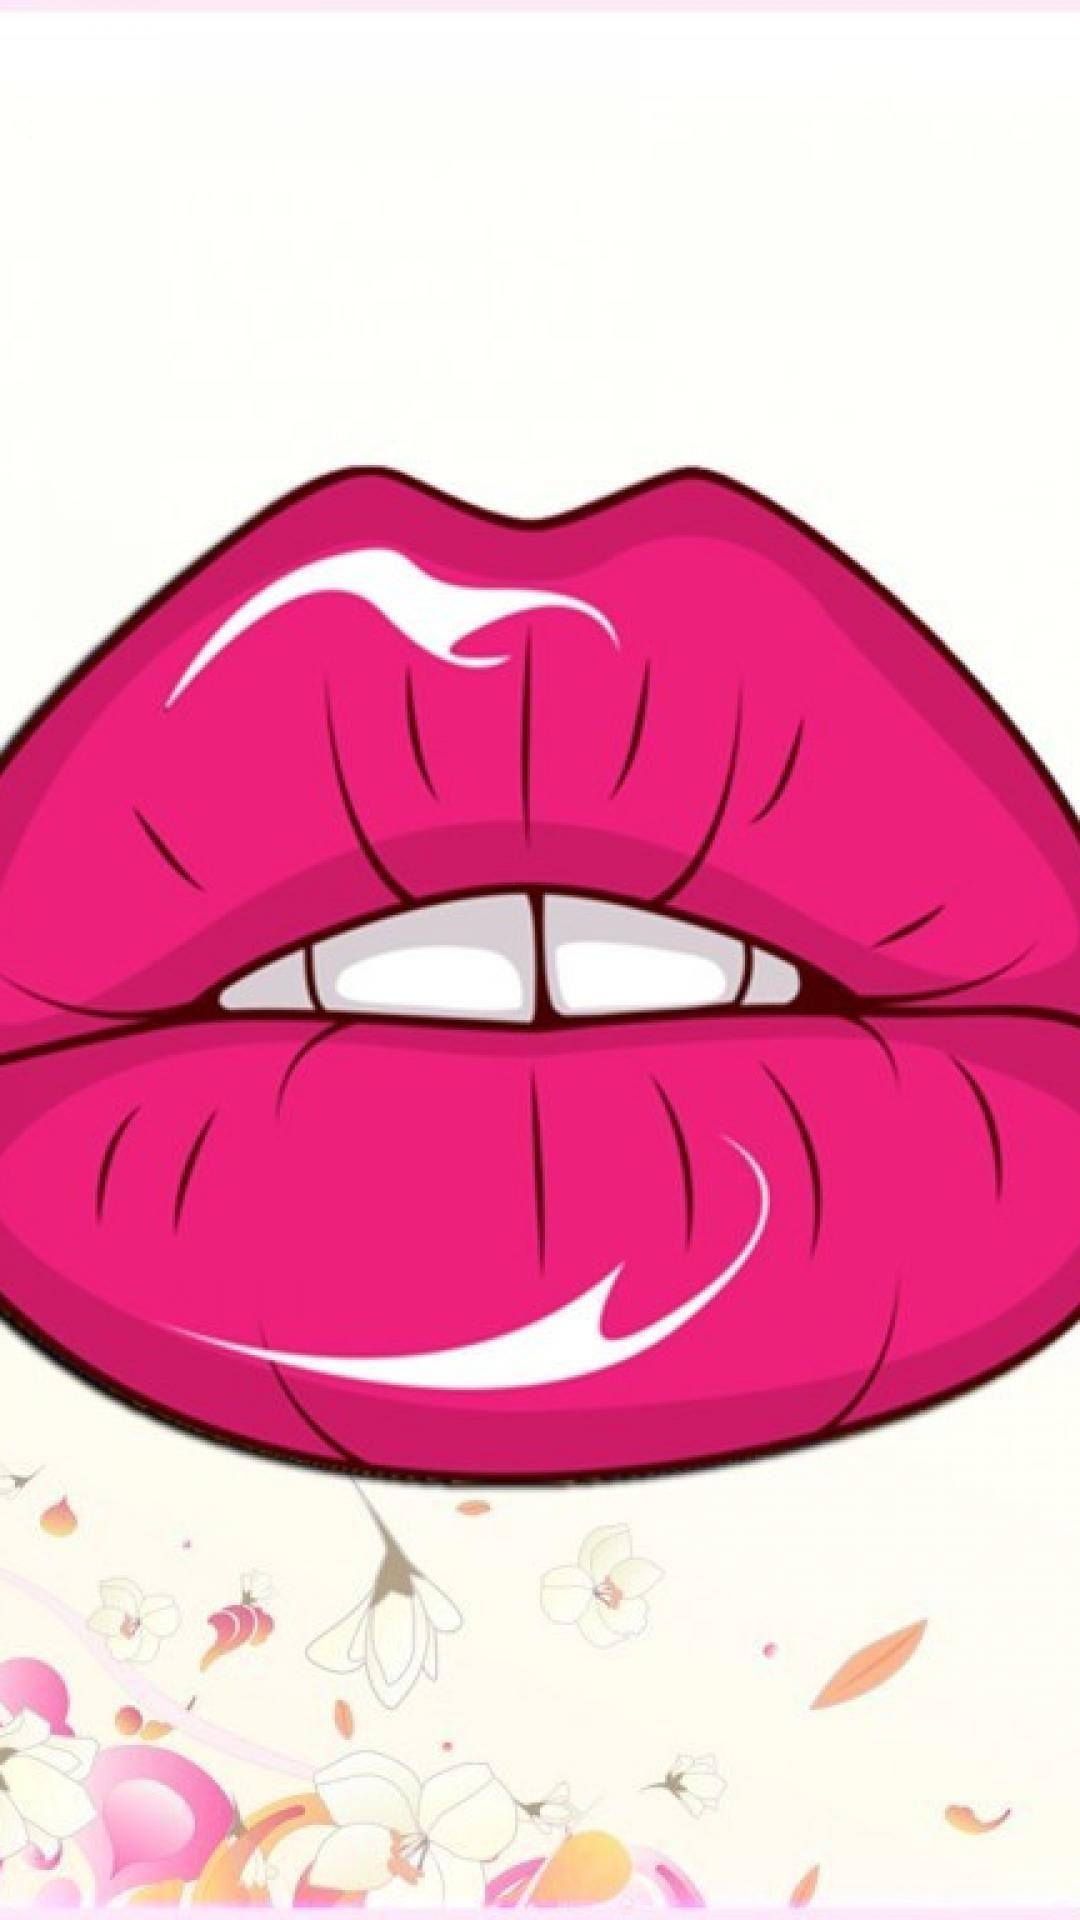 Close-Up Essentials Lips Live Wallpaper for phone screens - free download